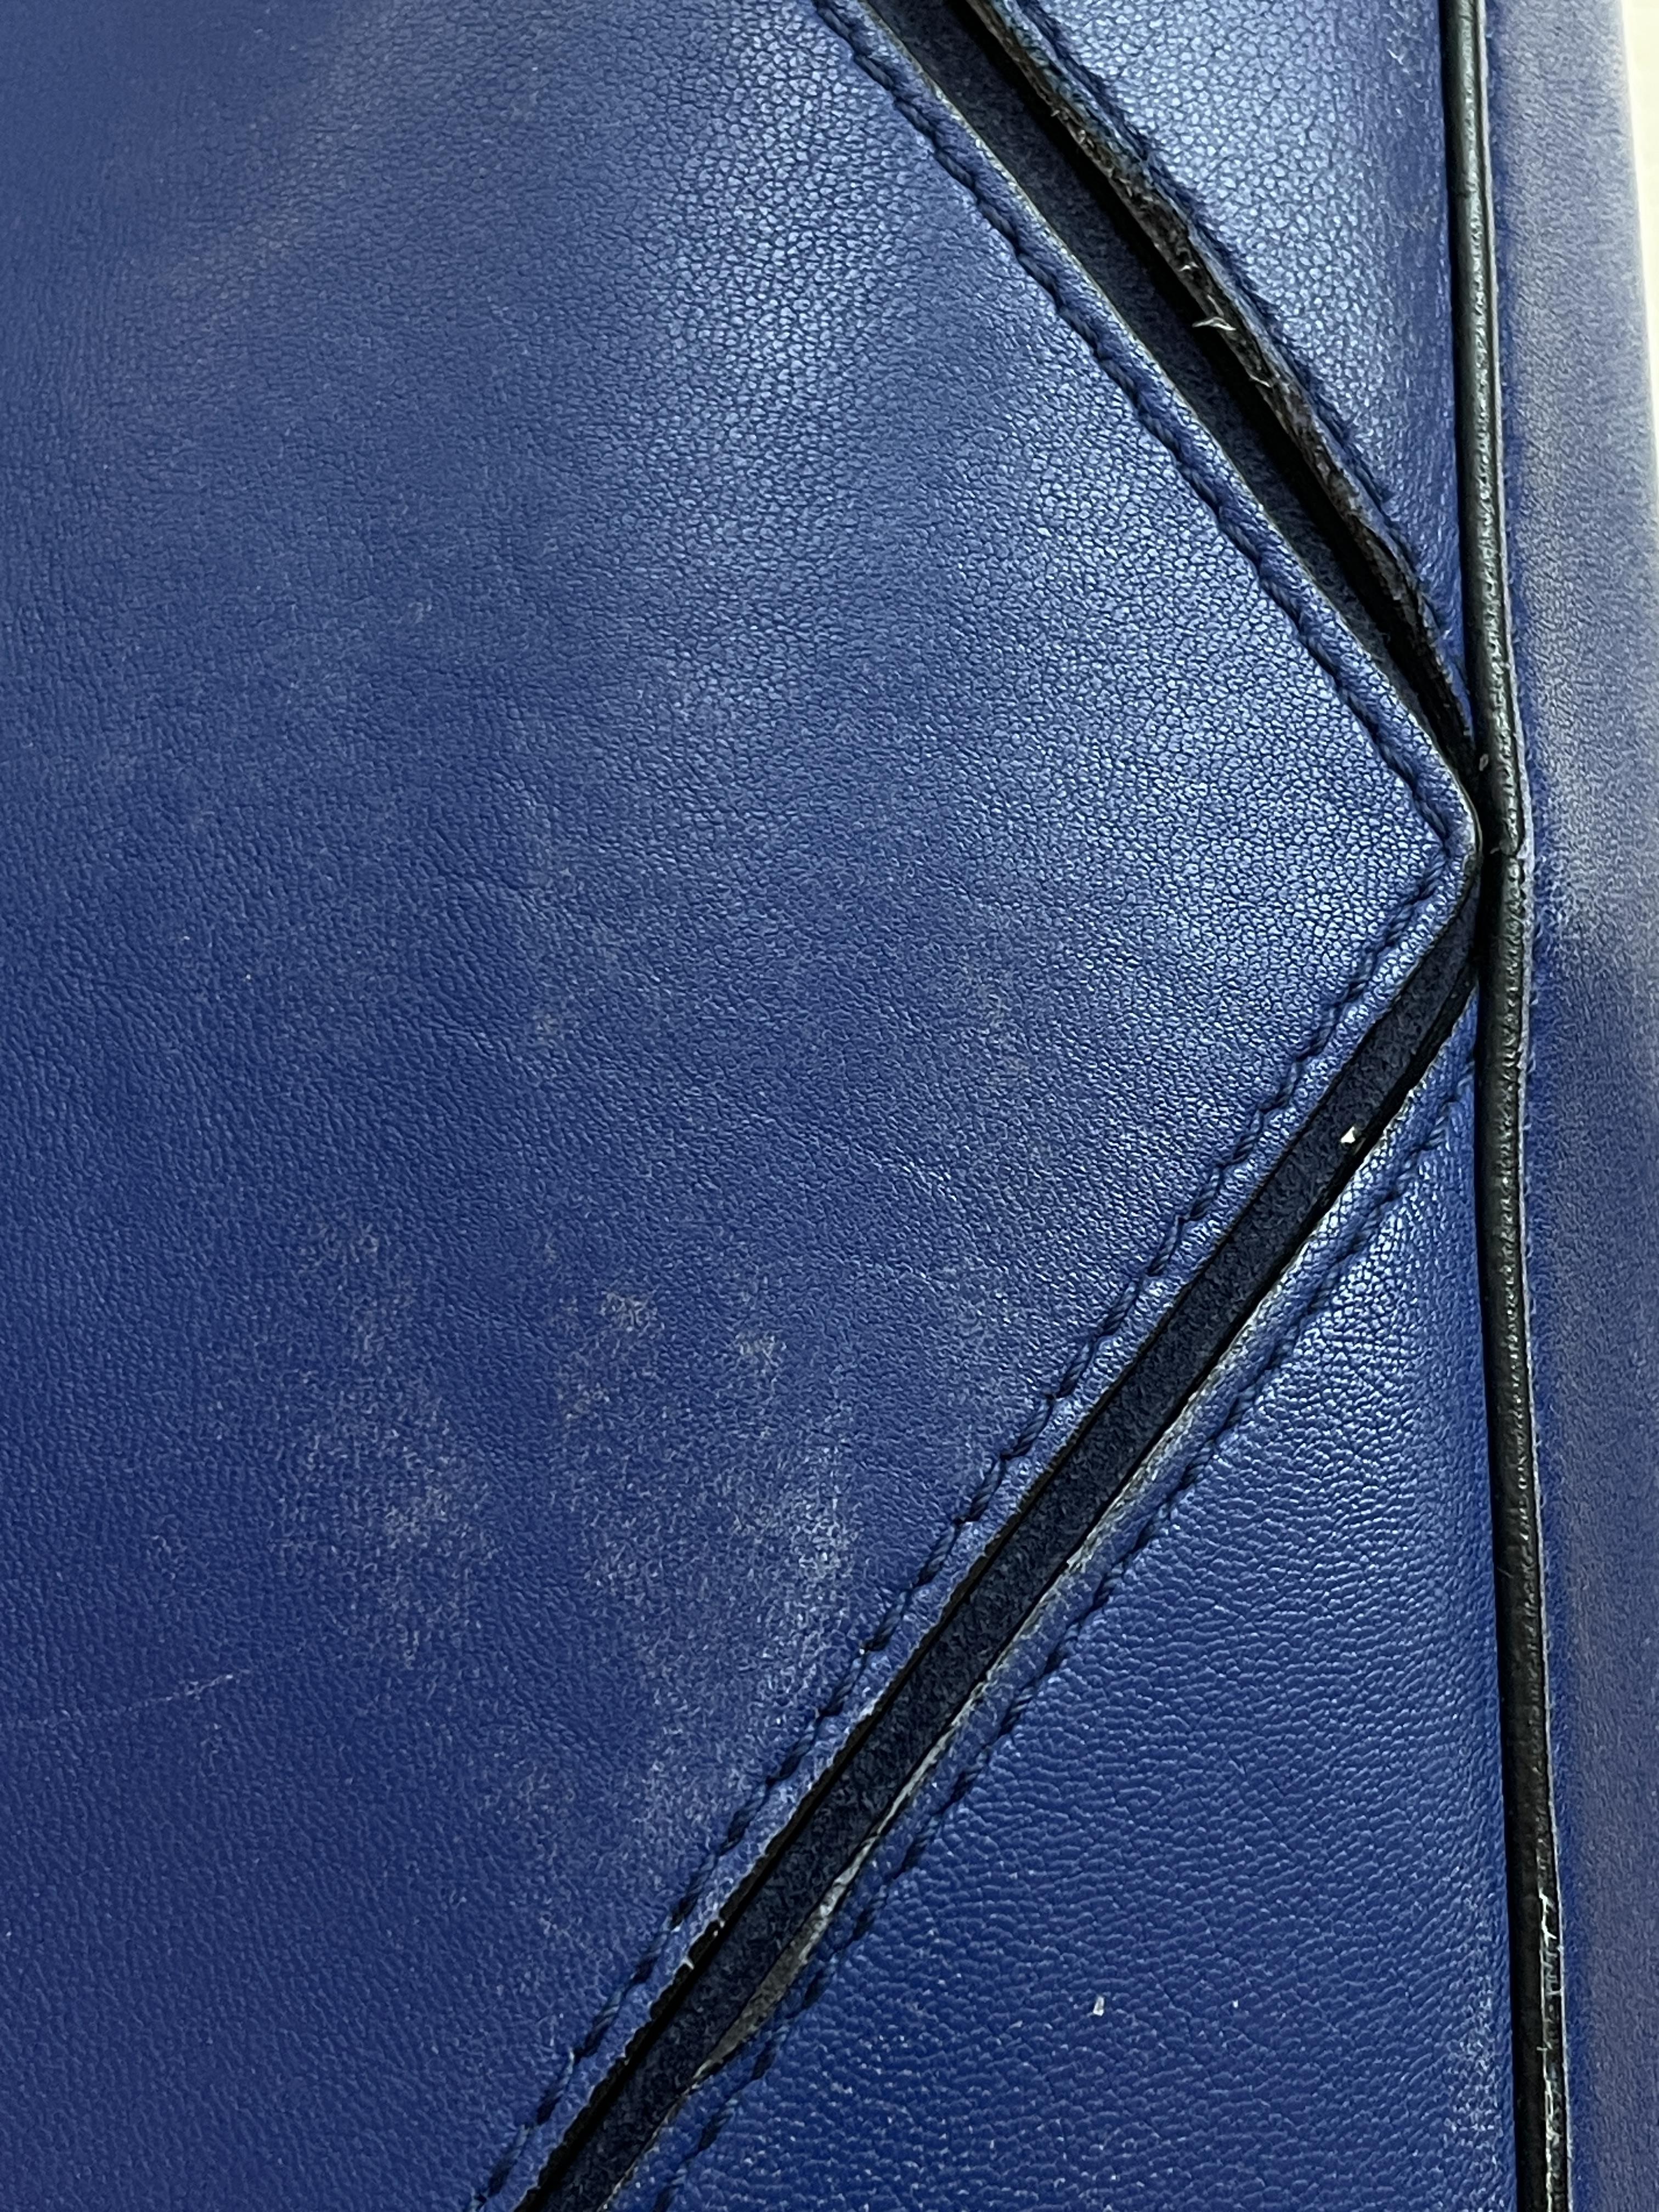 A GIVENCHY BLUE 'EASY' LEATHER TOTE BAG - Image 8 of 10